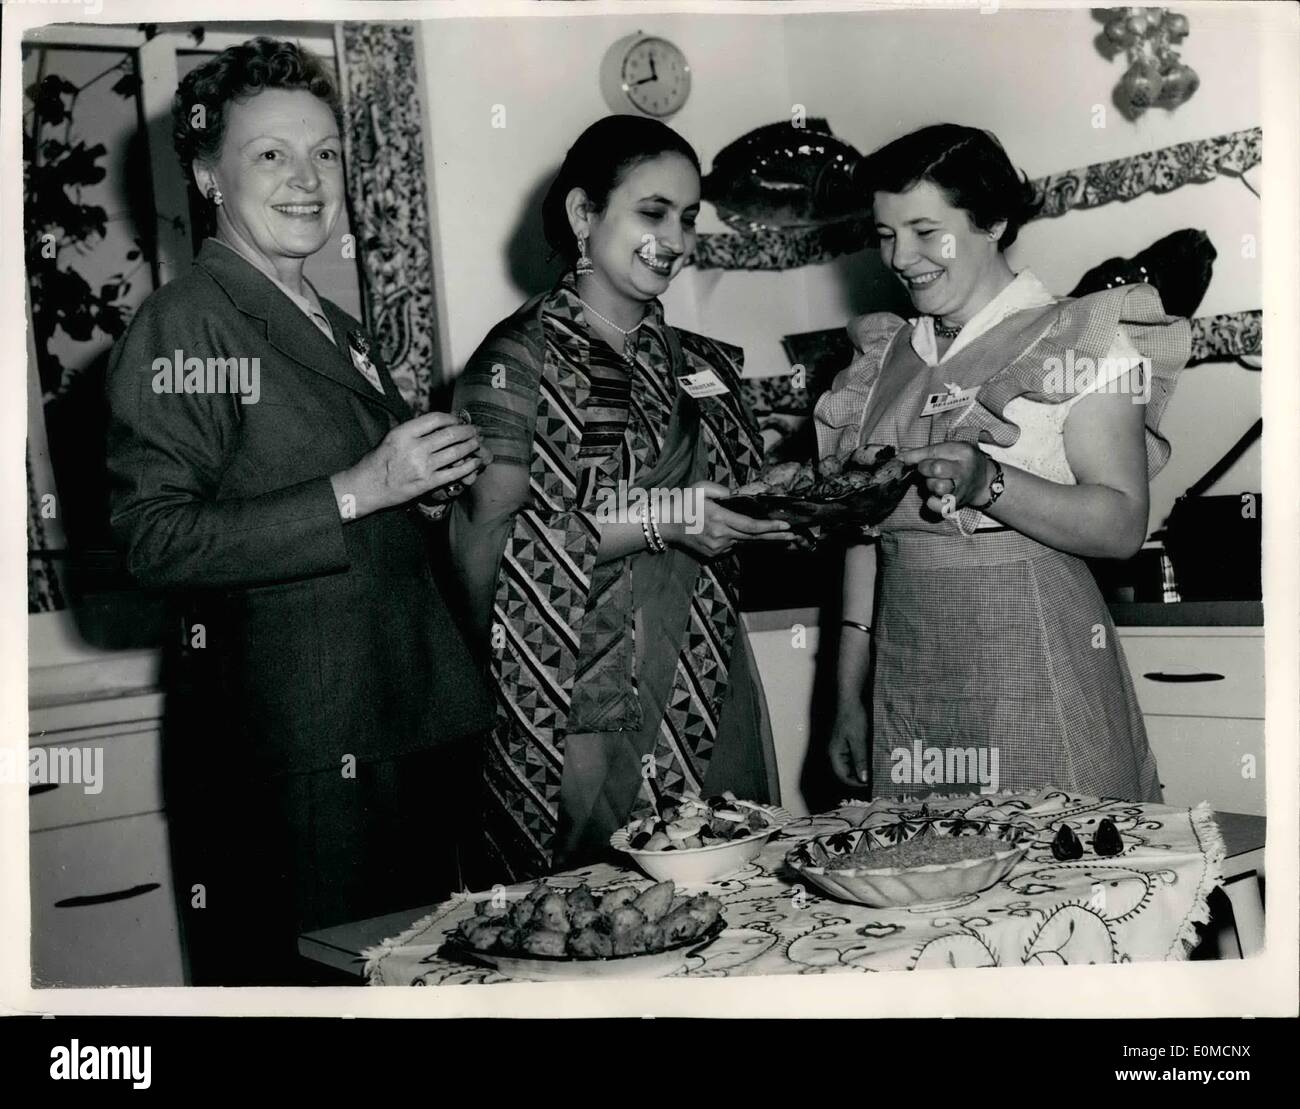 Sep. 02, 1954 - 2-9-54 International Kitchen at the British Food Fair. Today's Press Preview. A press preview for International Kitchen, the Gas Council's exhibit at the British Food Fair at Olympia (Sept 7-18), was held today at Gas Industry House, Grosvenor Place. Eighteen countries including Great Britain will be represented for the exhibition of international cookery. Keystone Photo Shows: Seen in the demonstrating kitchen at today's press preview are (L to R): Mrs. Estrud Bannister, of Copenhagen, Denamrk; Miss Marie-Louise Leceuve, of Mons, Belgium, and Begum Ahmed Ali Khan, of Pakistan Stock Photo